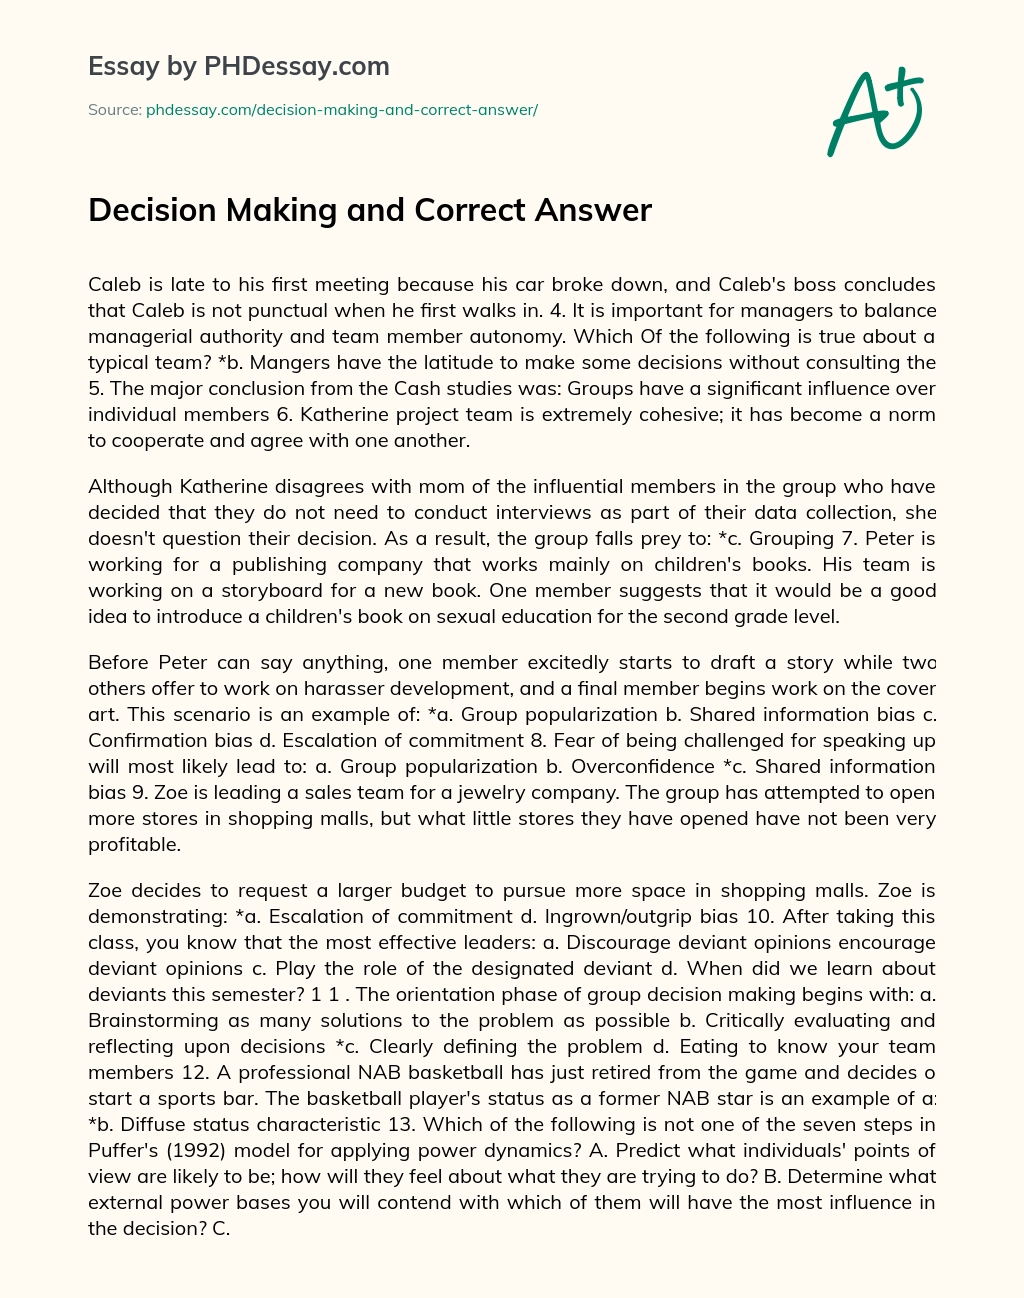 Decision Making and Correct Answer essay